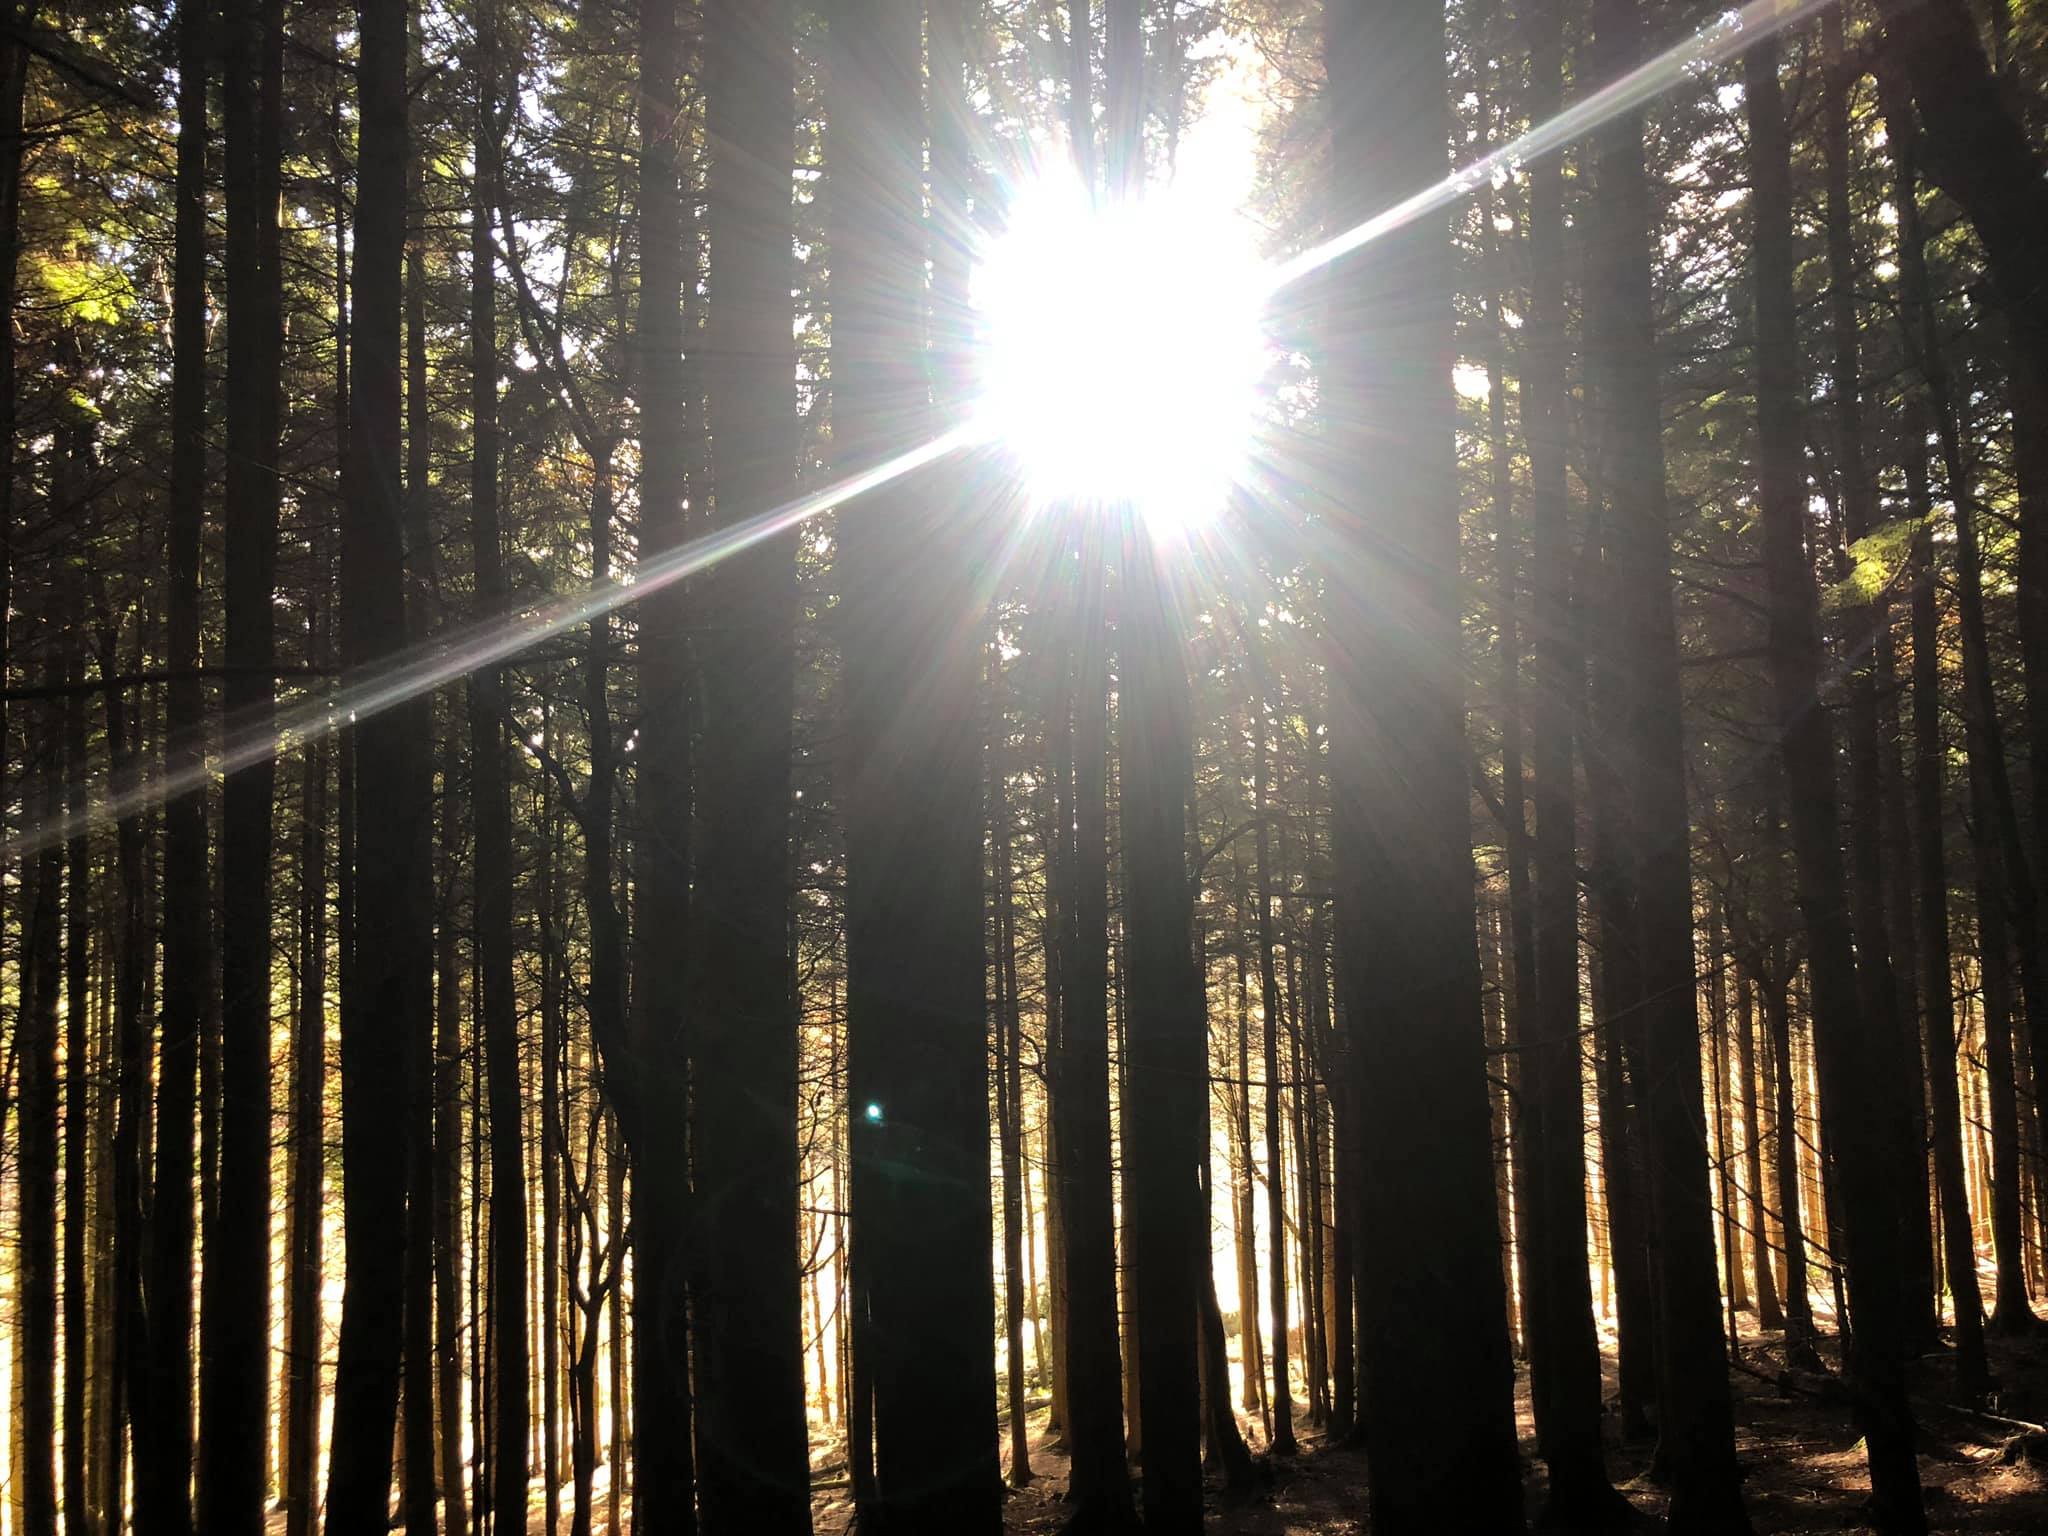 Sunlight through the trees in Whinlatter Forest